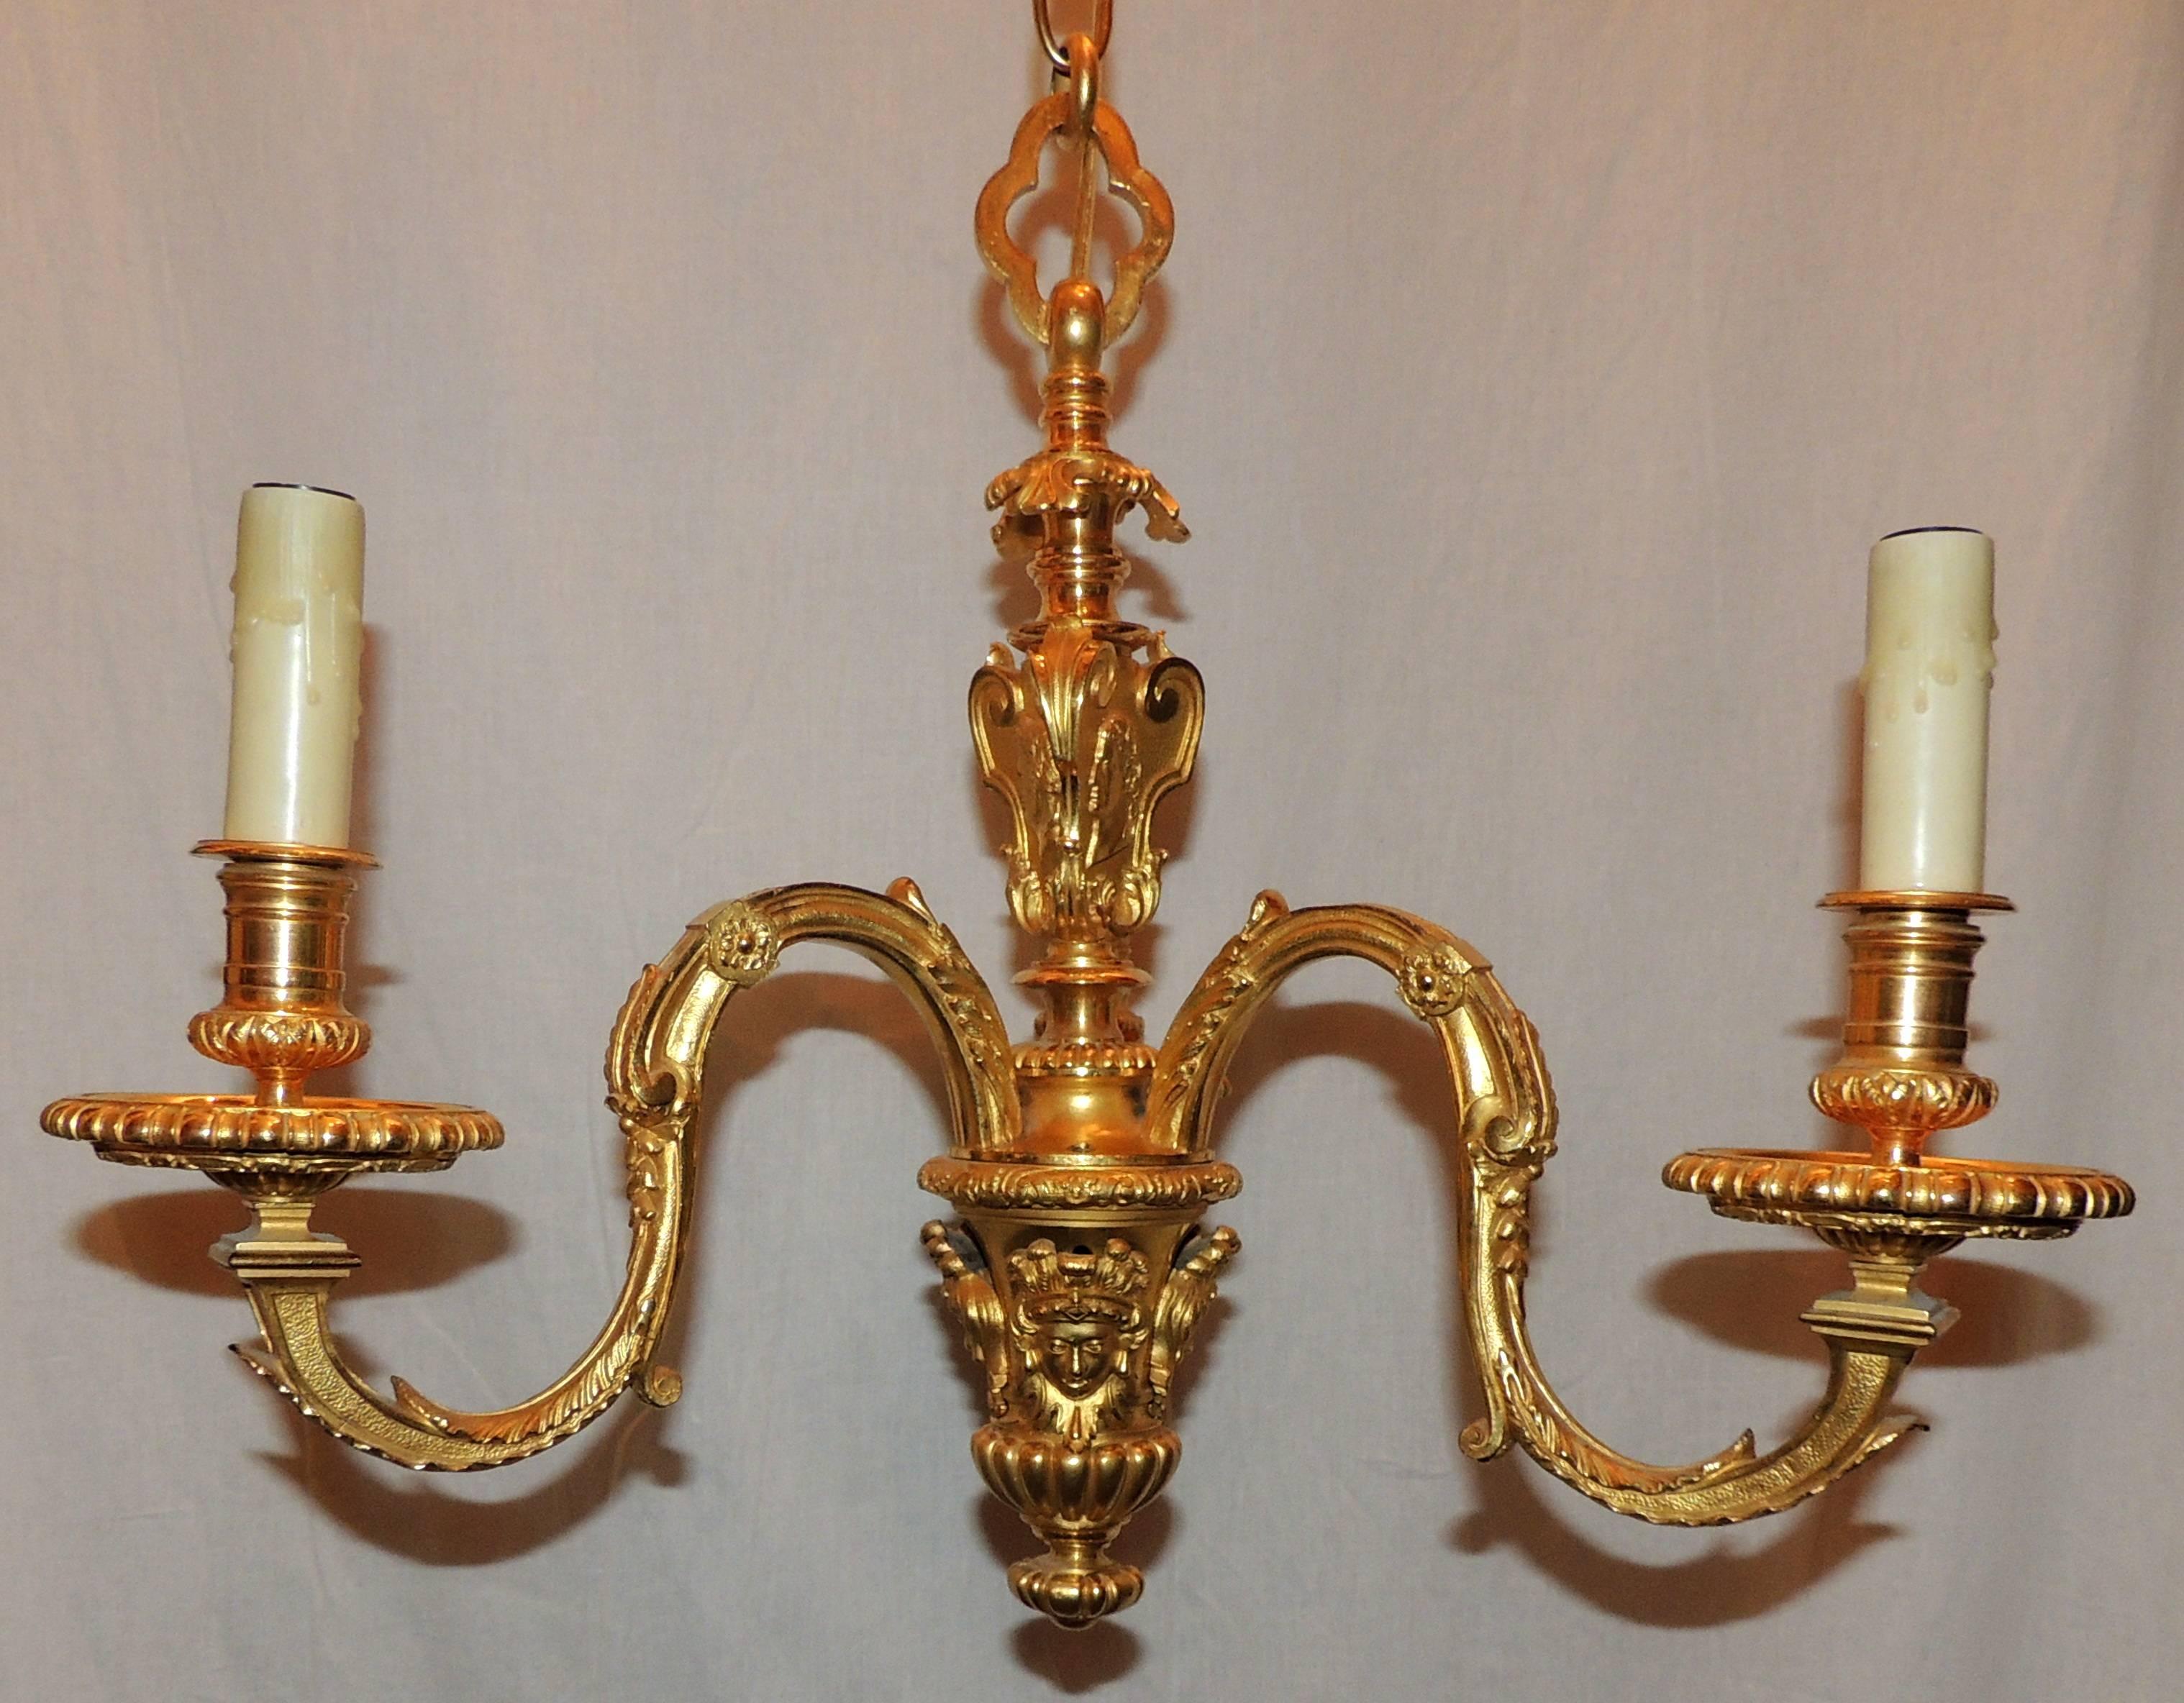 A wonderful pair of French doré bronze, petite neoclassical / Empire pendant chandeliers with three lights each that have been rewired and come with all mounting hardware ready to install.